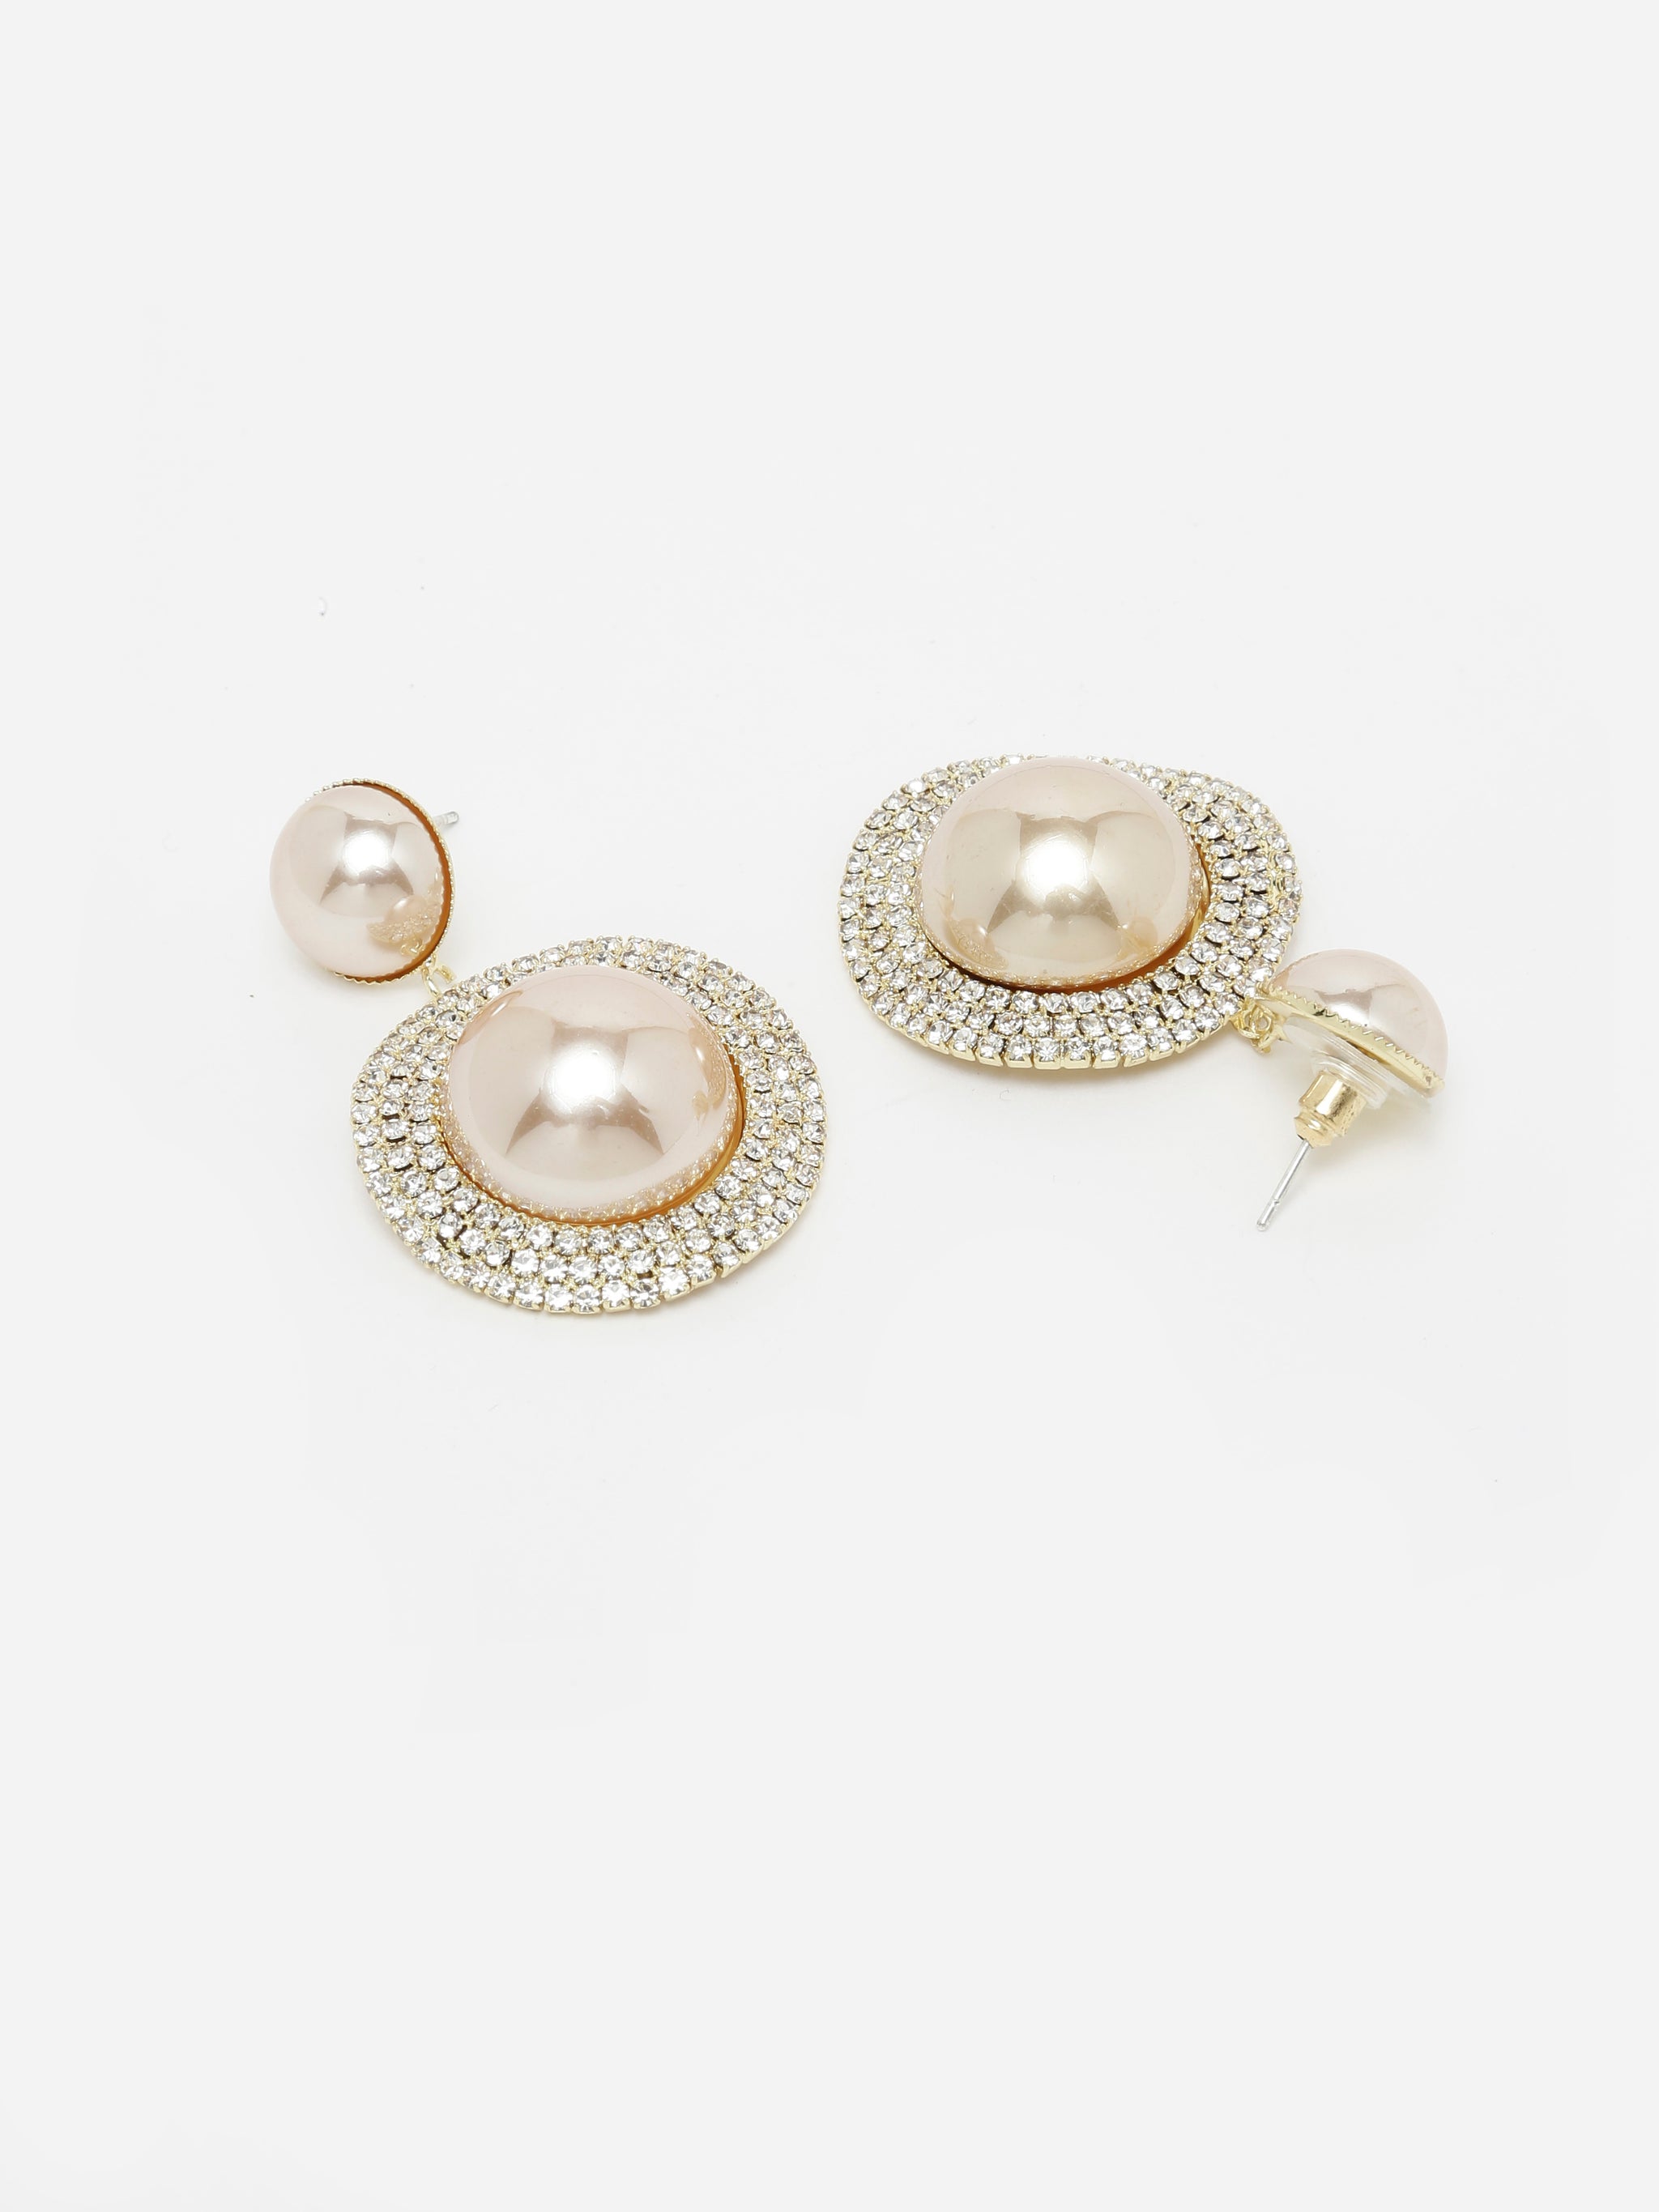 Intricate Rose Gold-Plated Dangling Earring